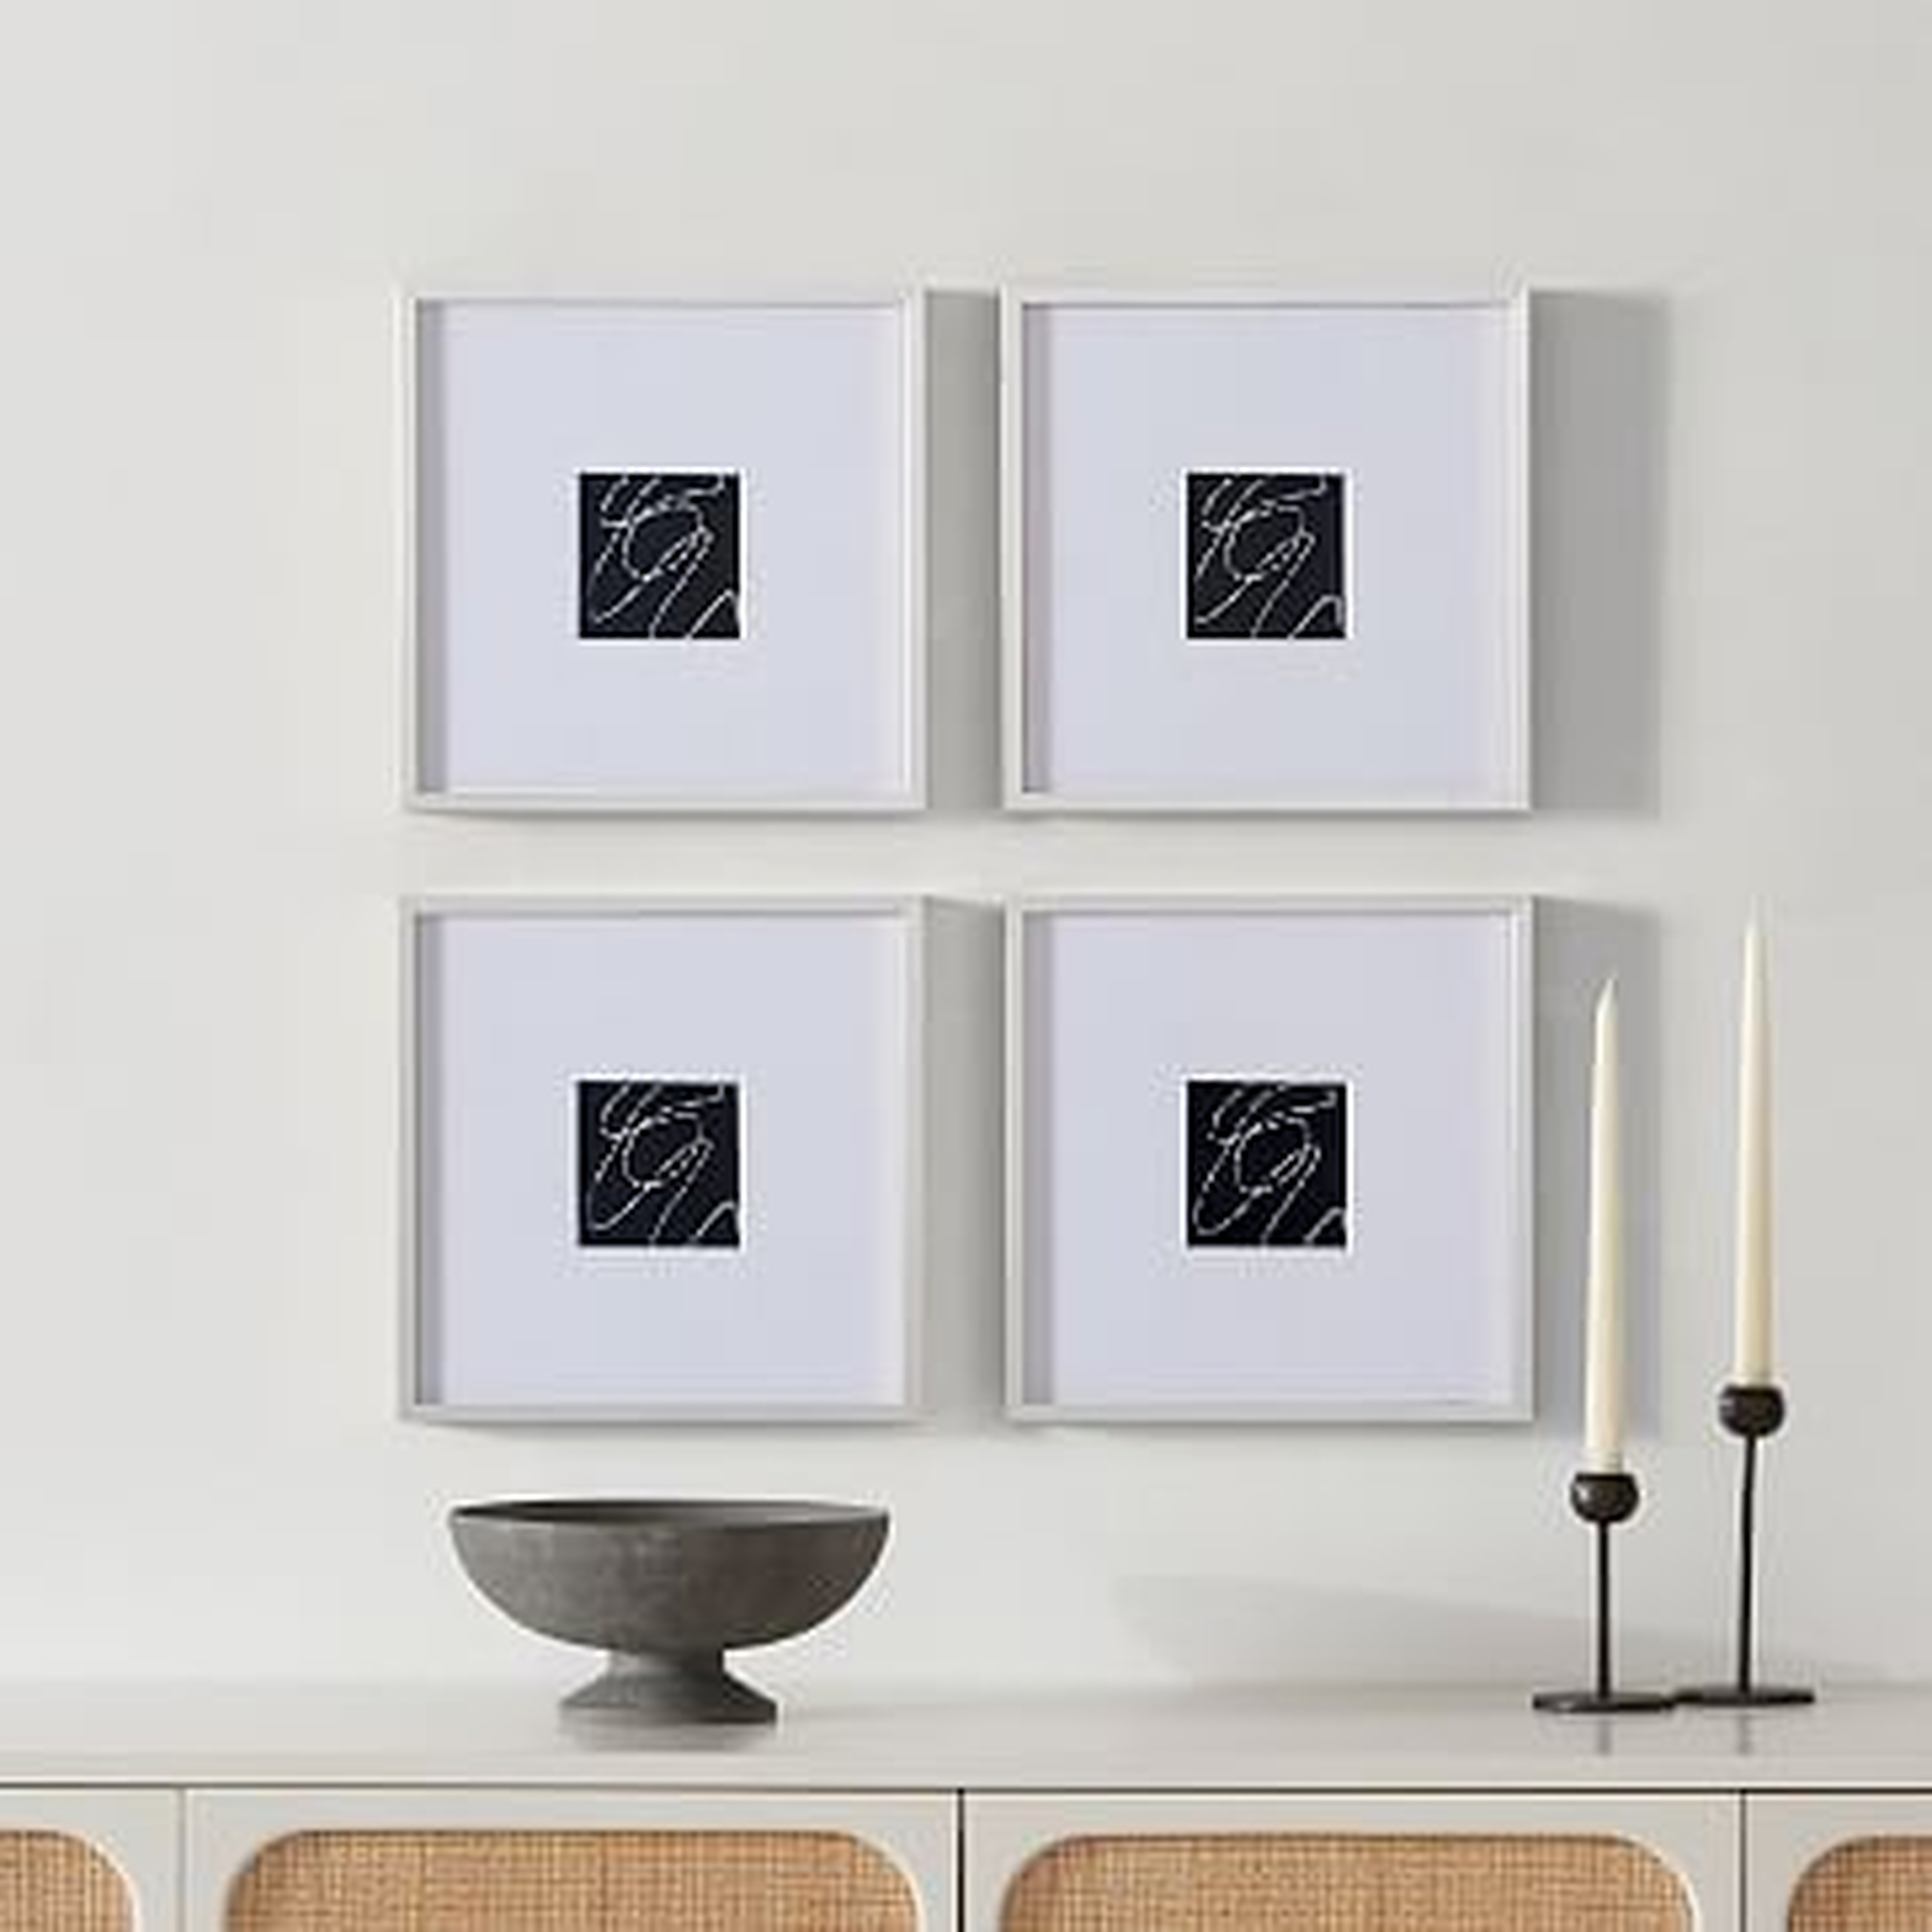 Metal Gallery Frame Square, White Powder Coated, 12X12 in Set of 4 - West Elm